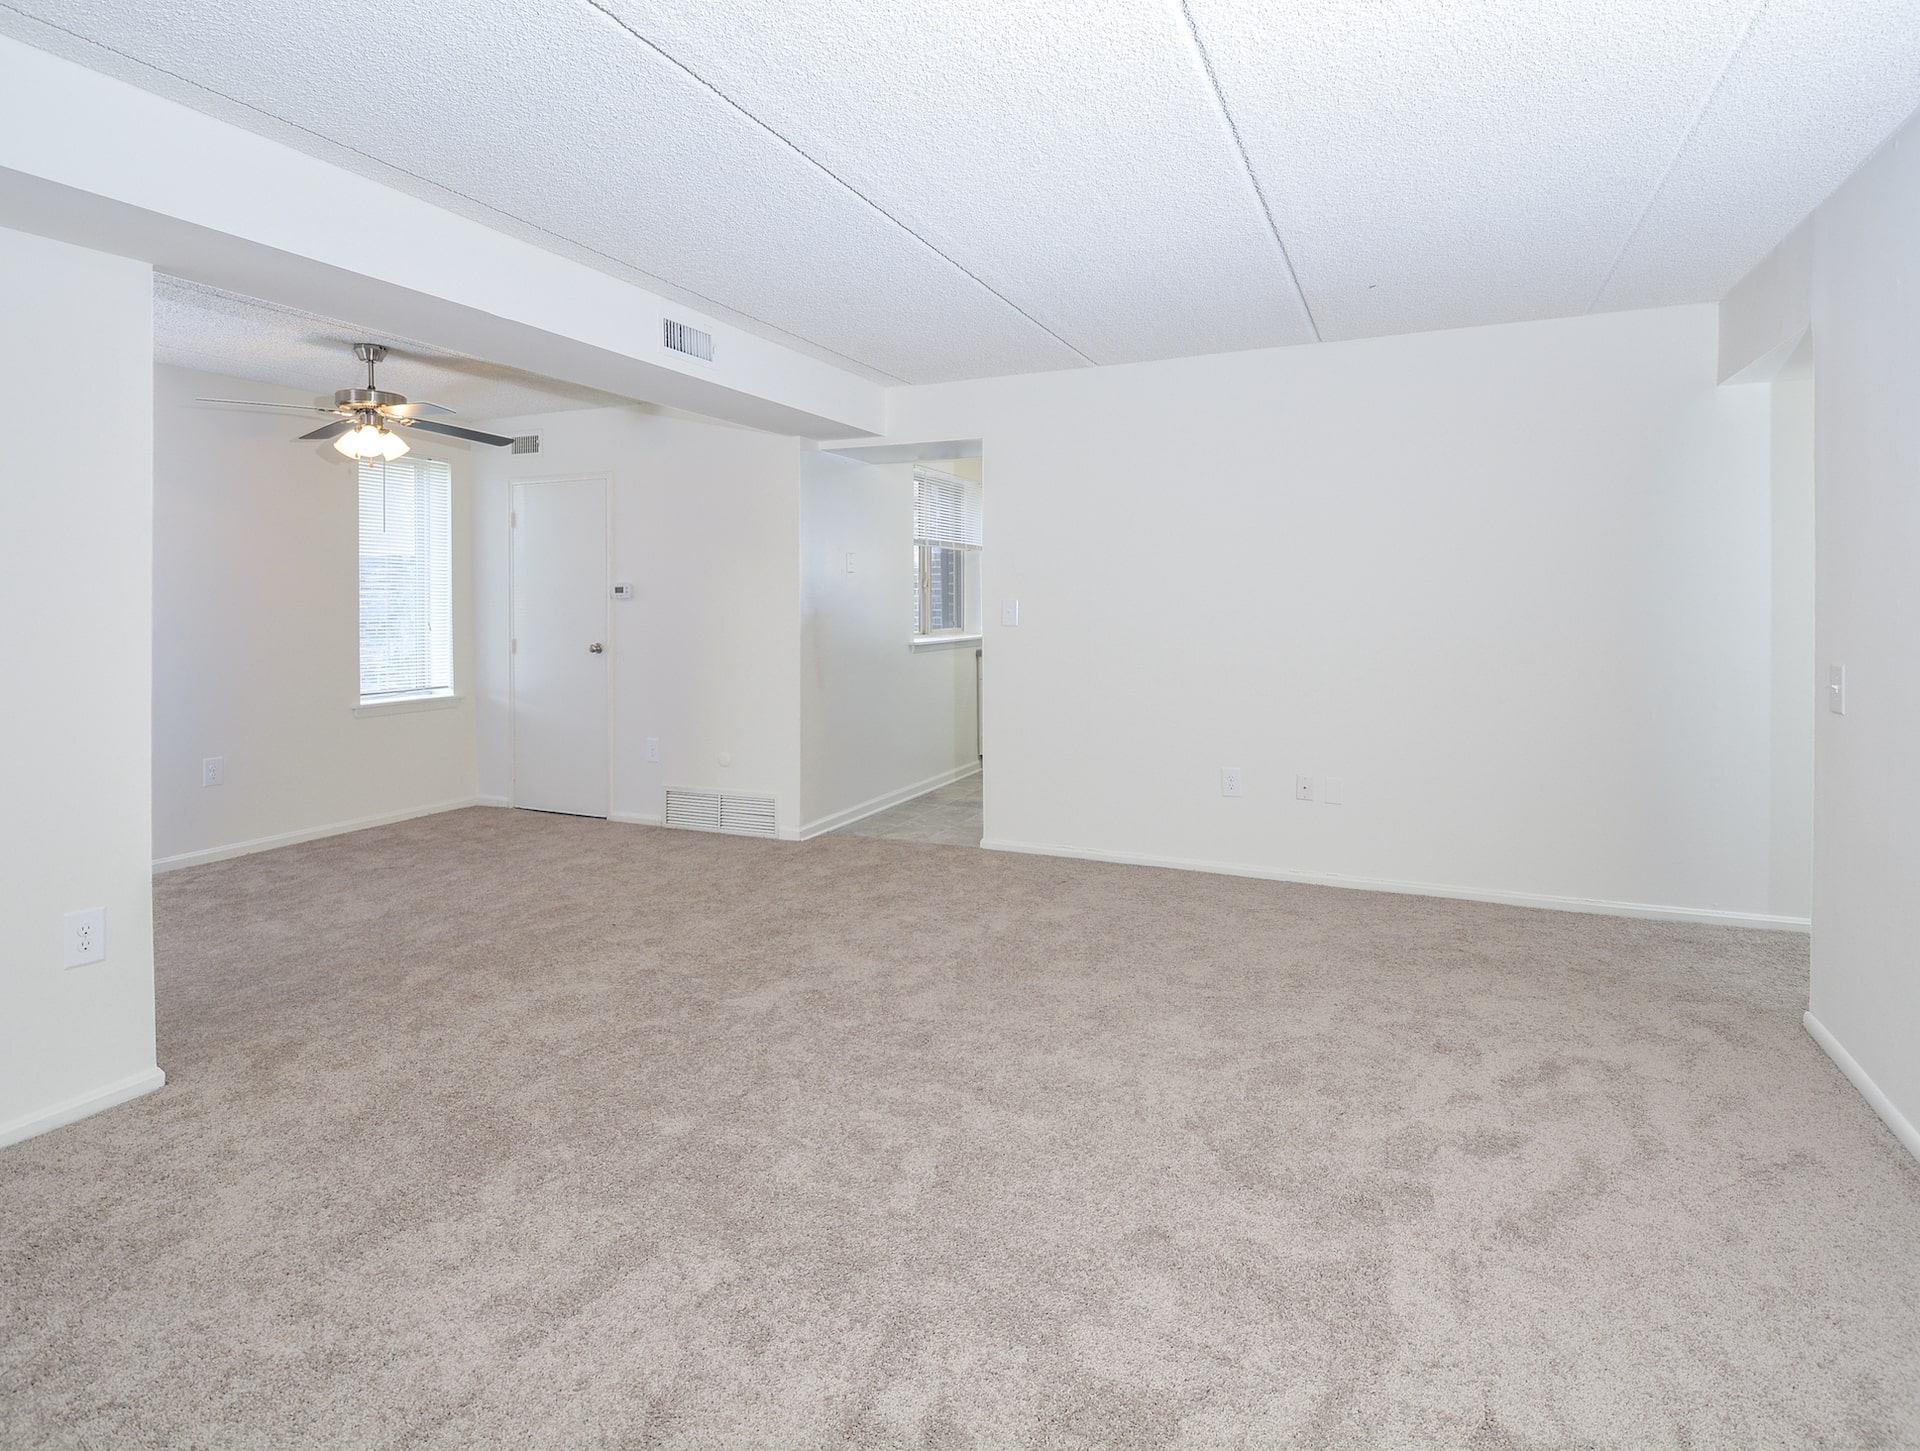 The bedroom area of an apartment unfurnished, fitted with carpet flooring, and a private bathroom